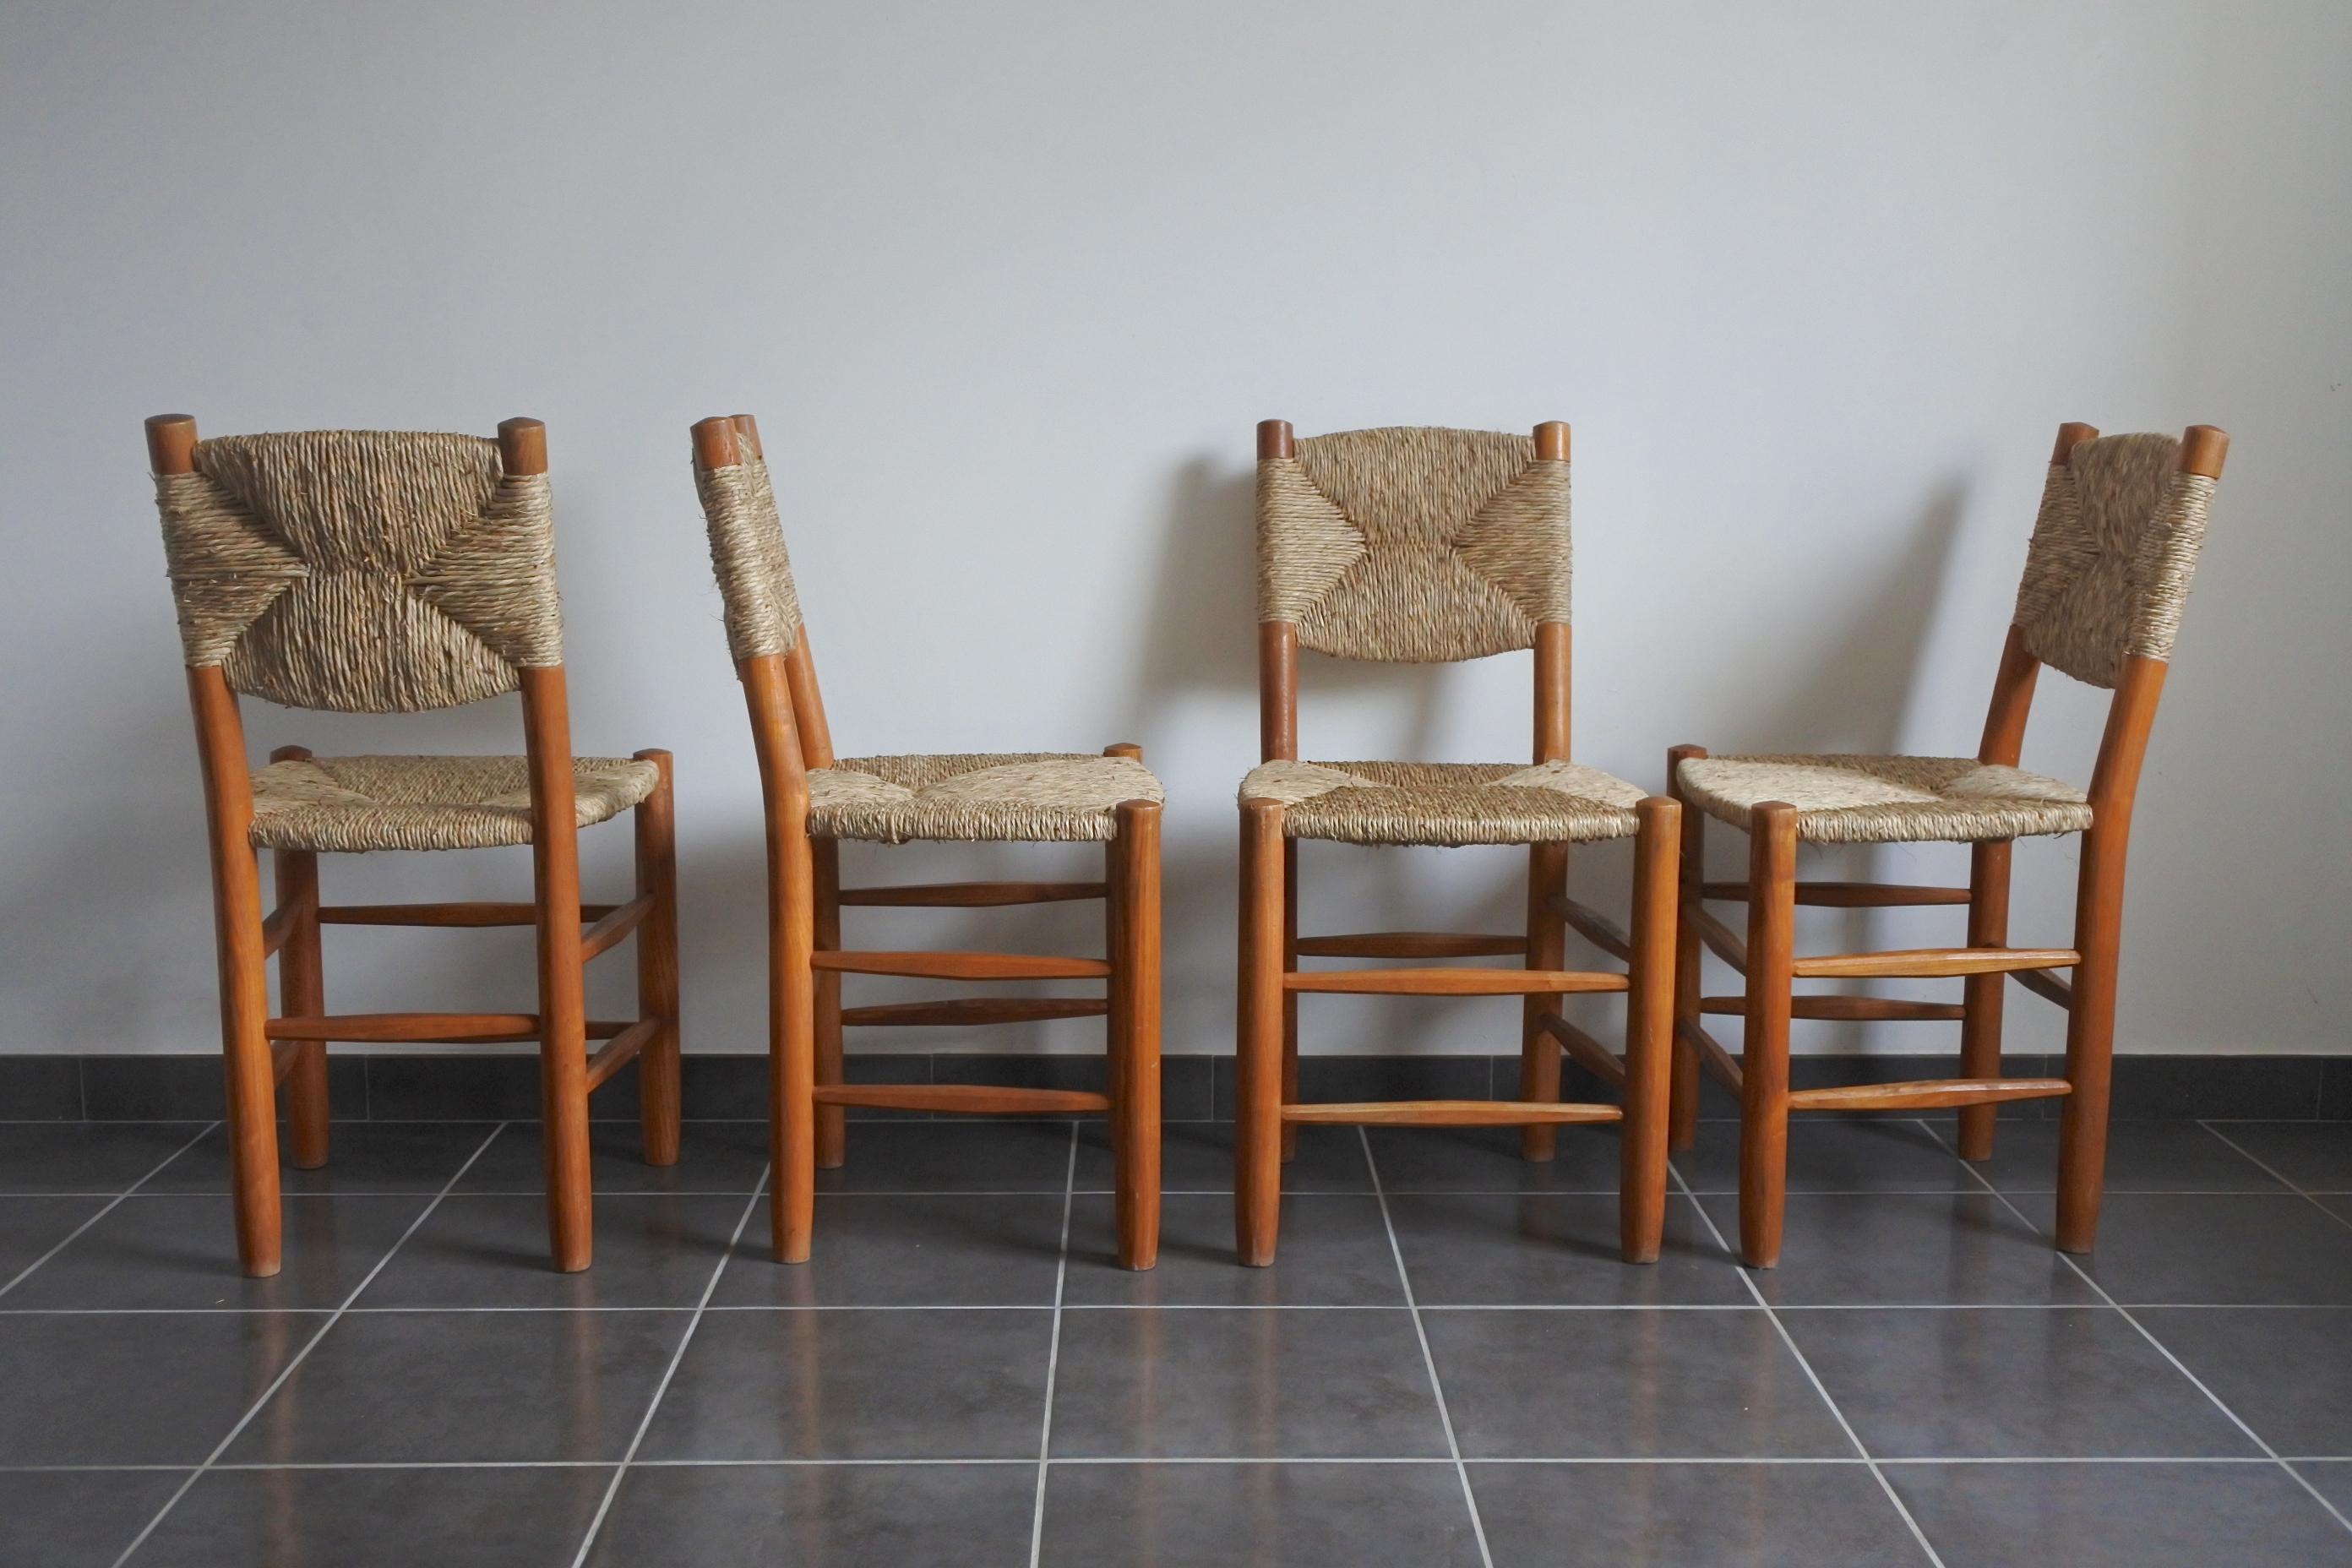 French Charlotte Perriand Set of Four Bauche Chairs N 19, Steph Simon, France, 1950s